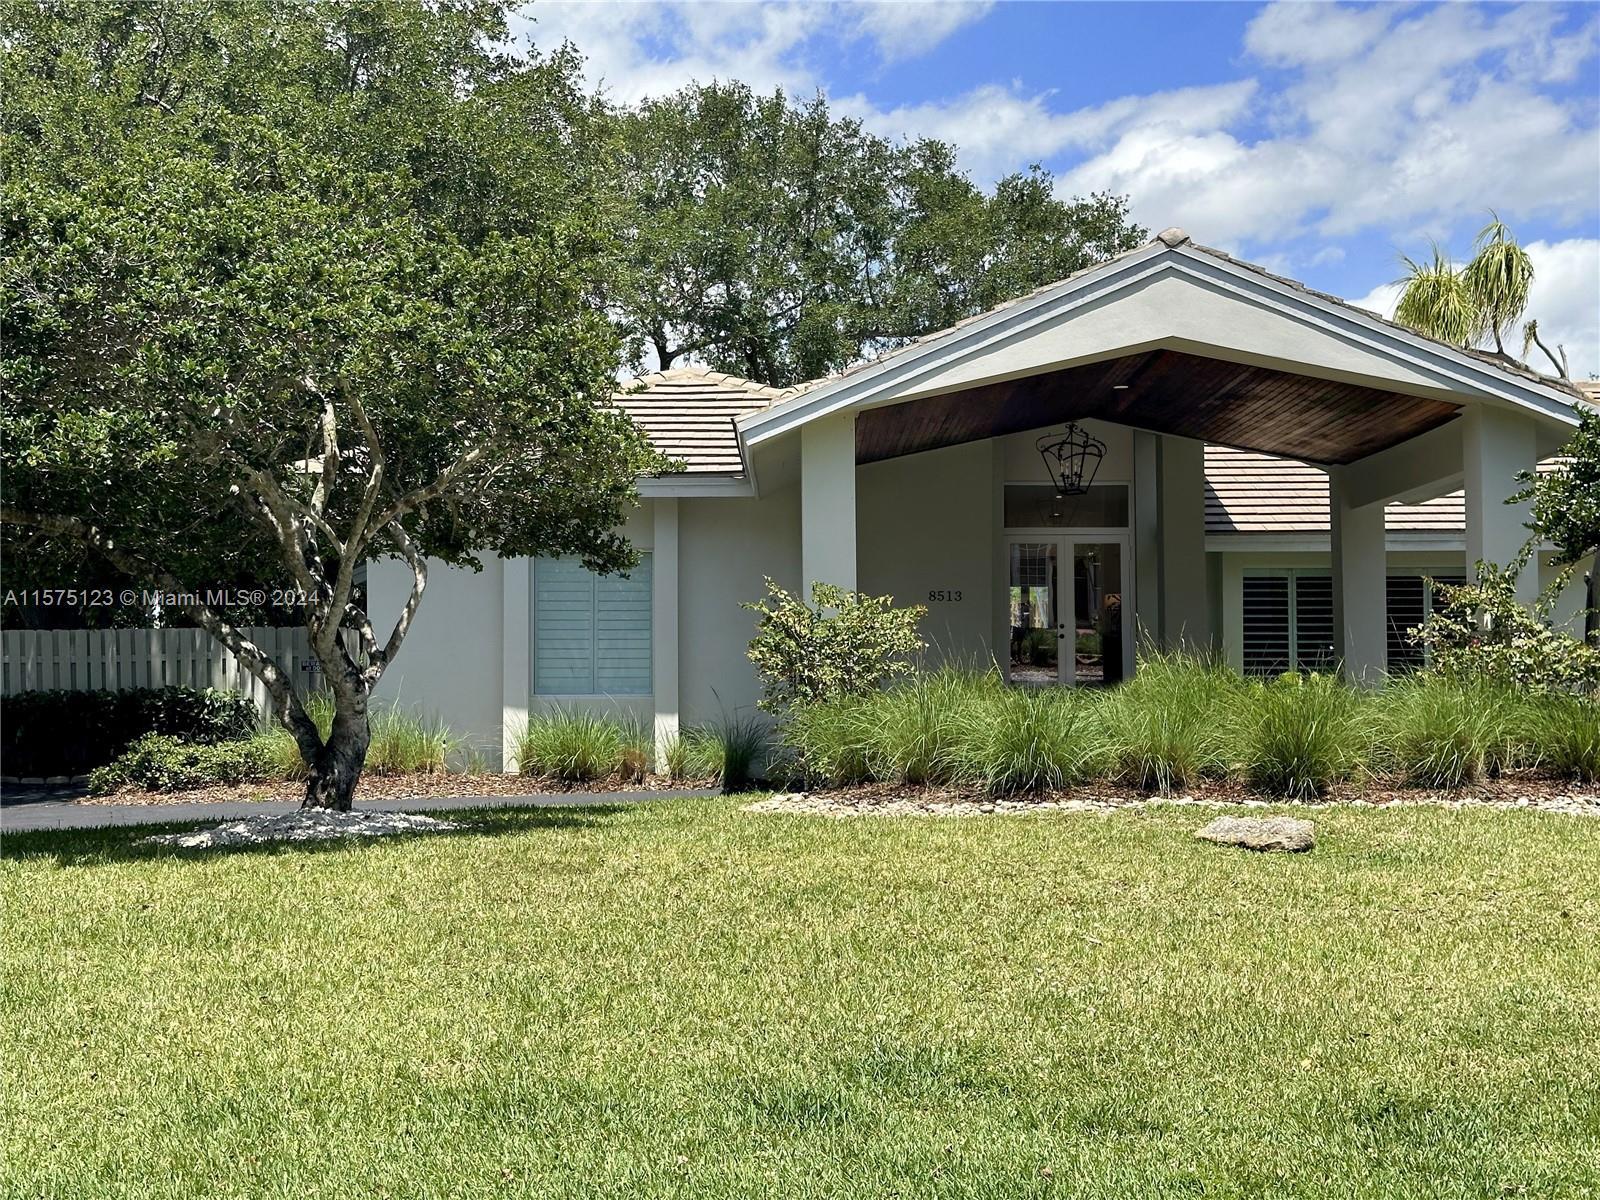 Beautifully remodeled in 2022, this home features 5 beds 3.5 baths in tranquil Palmetto Bay neighbor